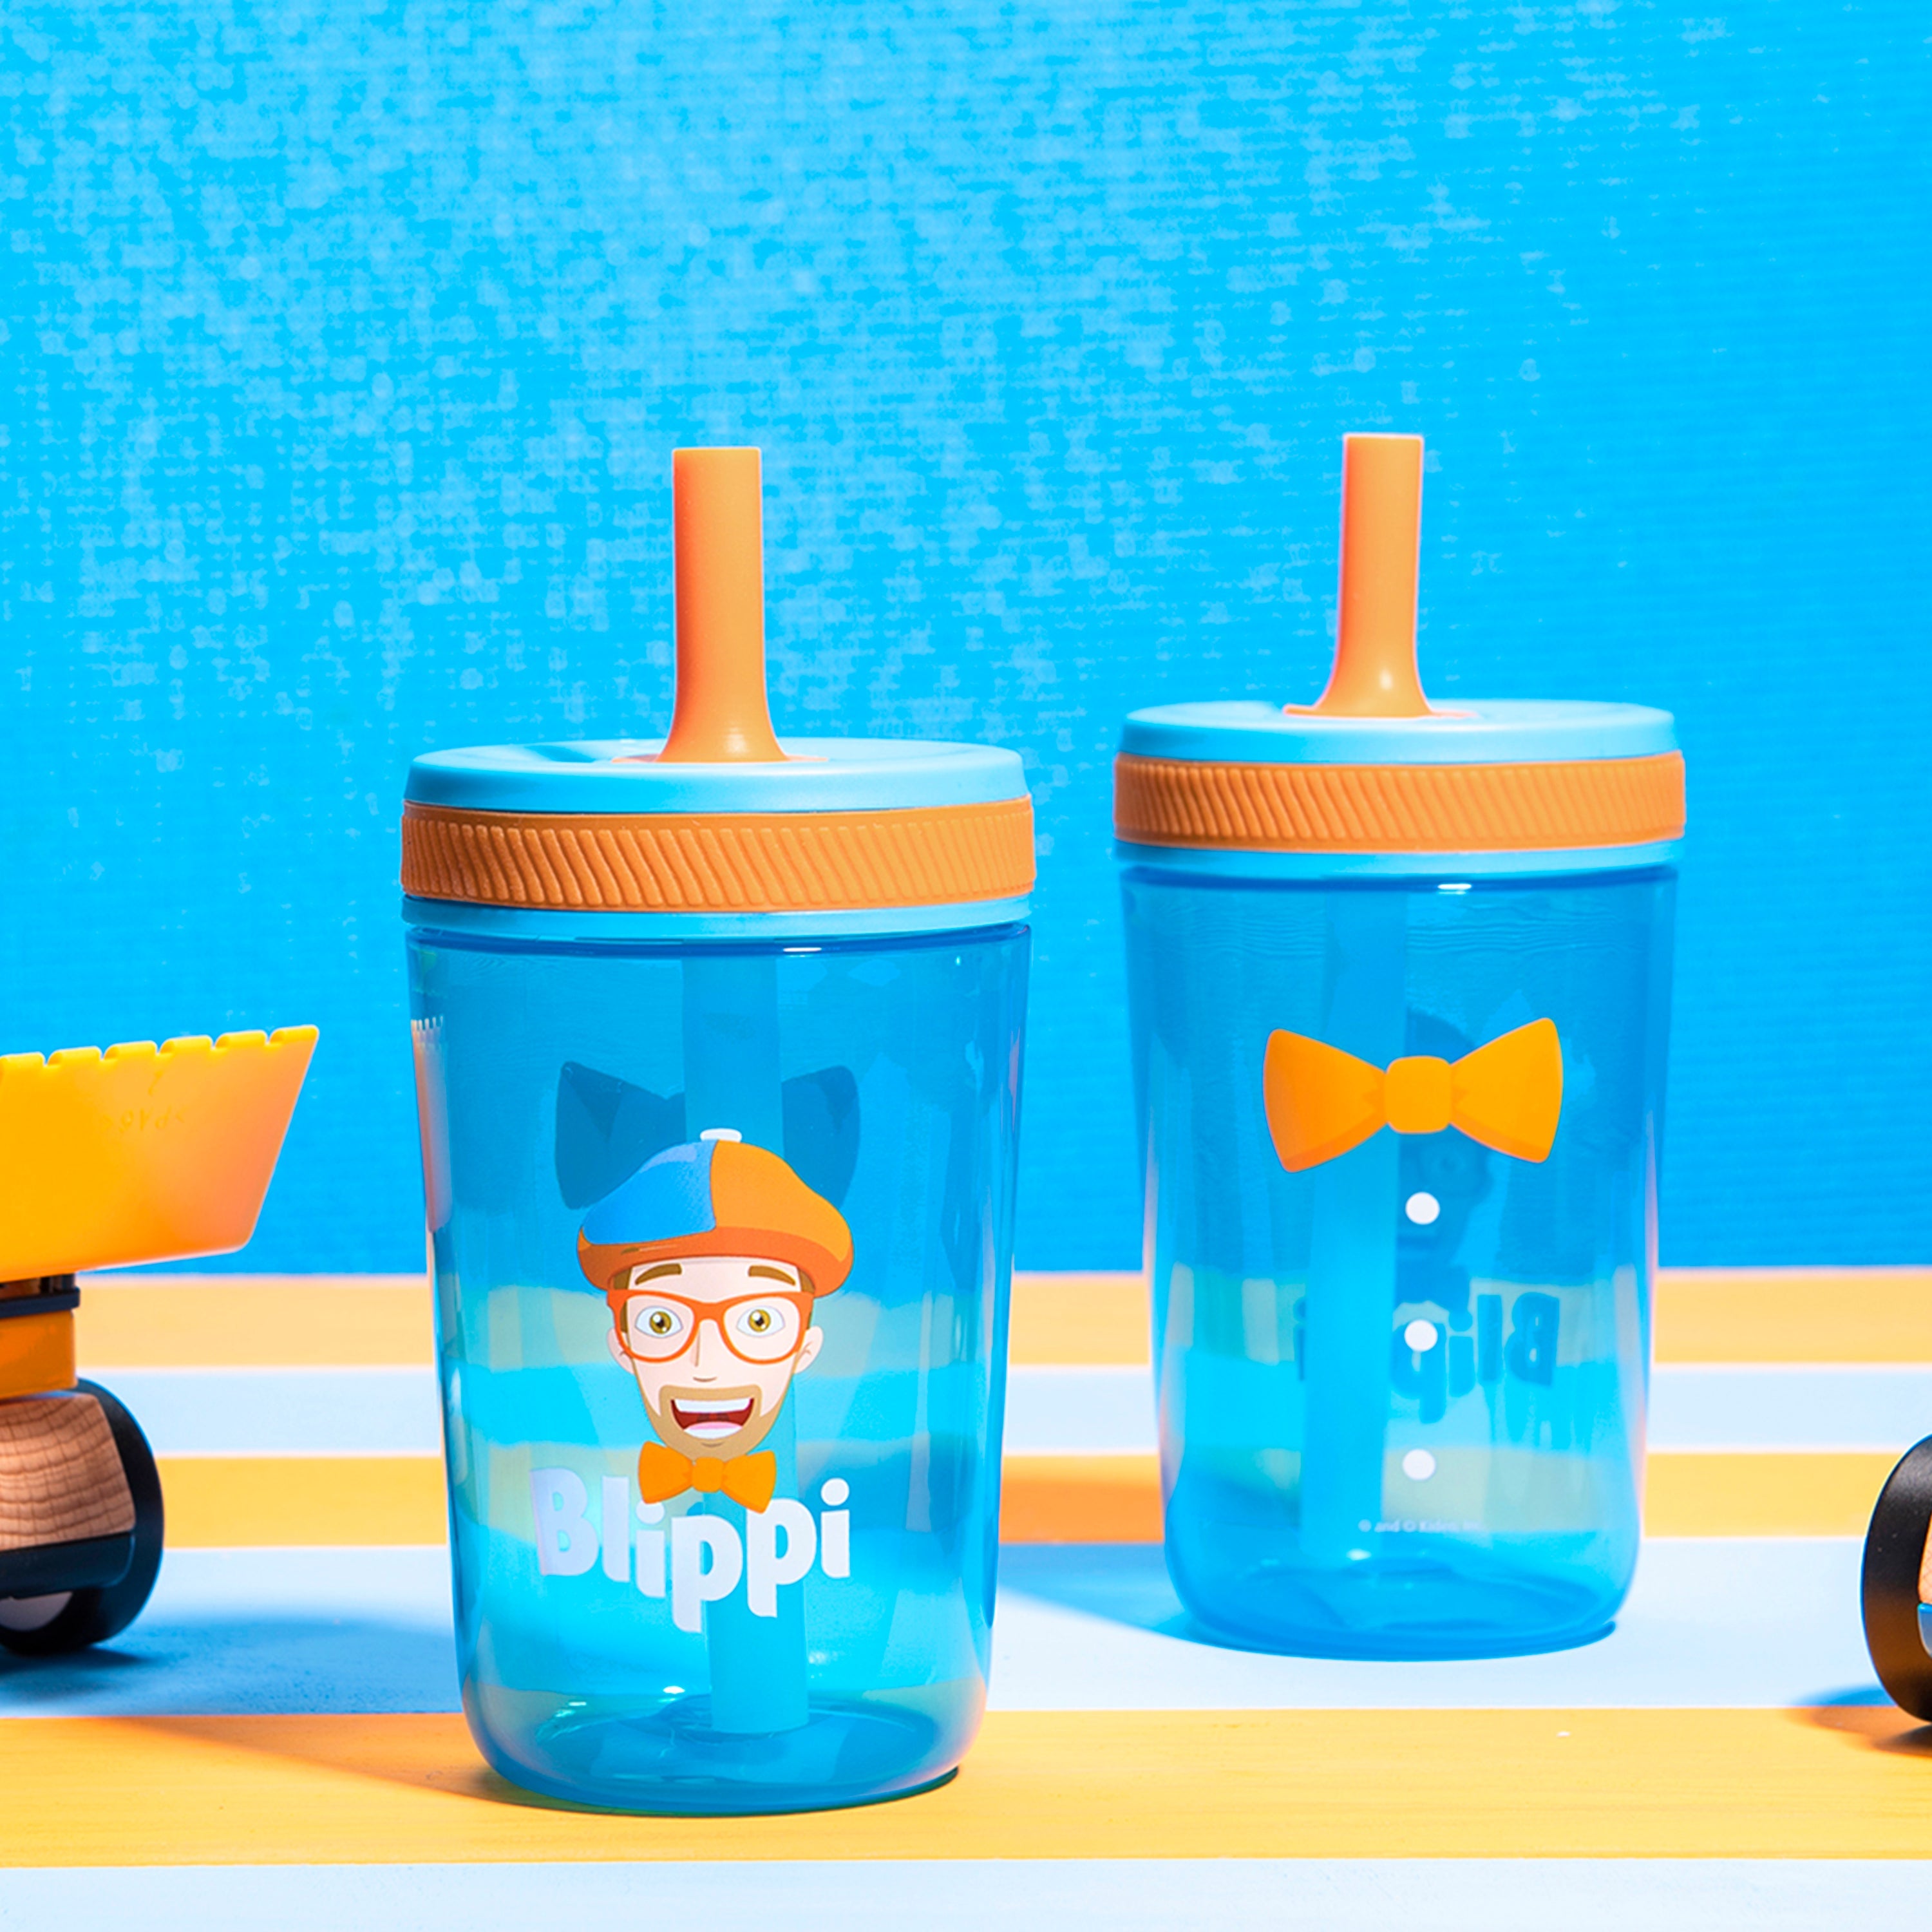 Blippi Kelso Kids Leak Proof Tumbler with Lid and Straw